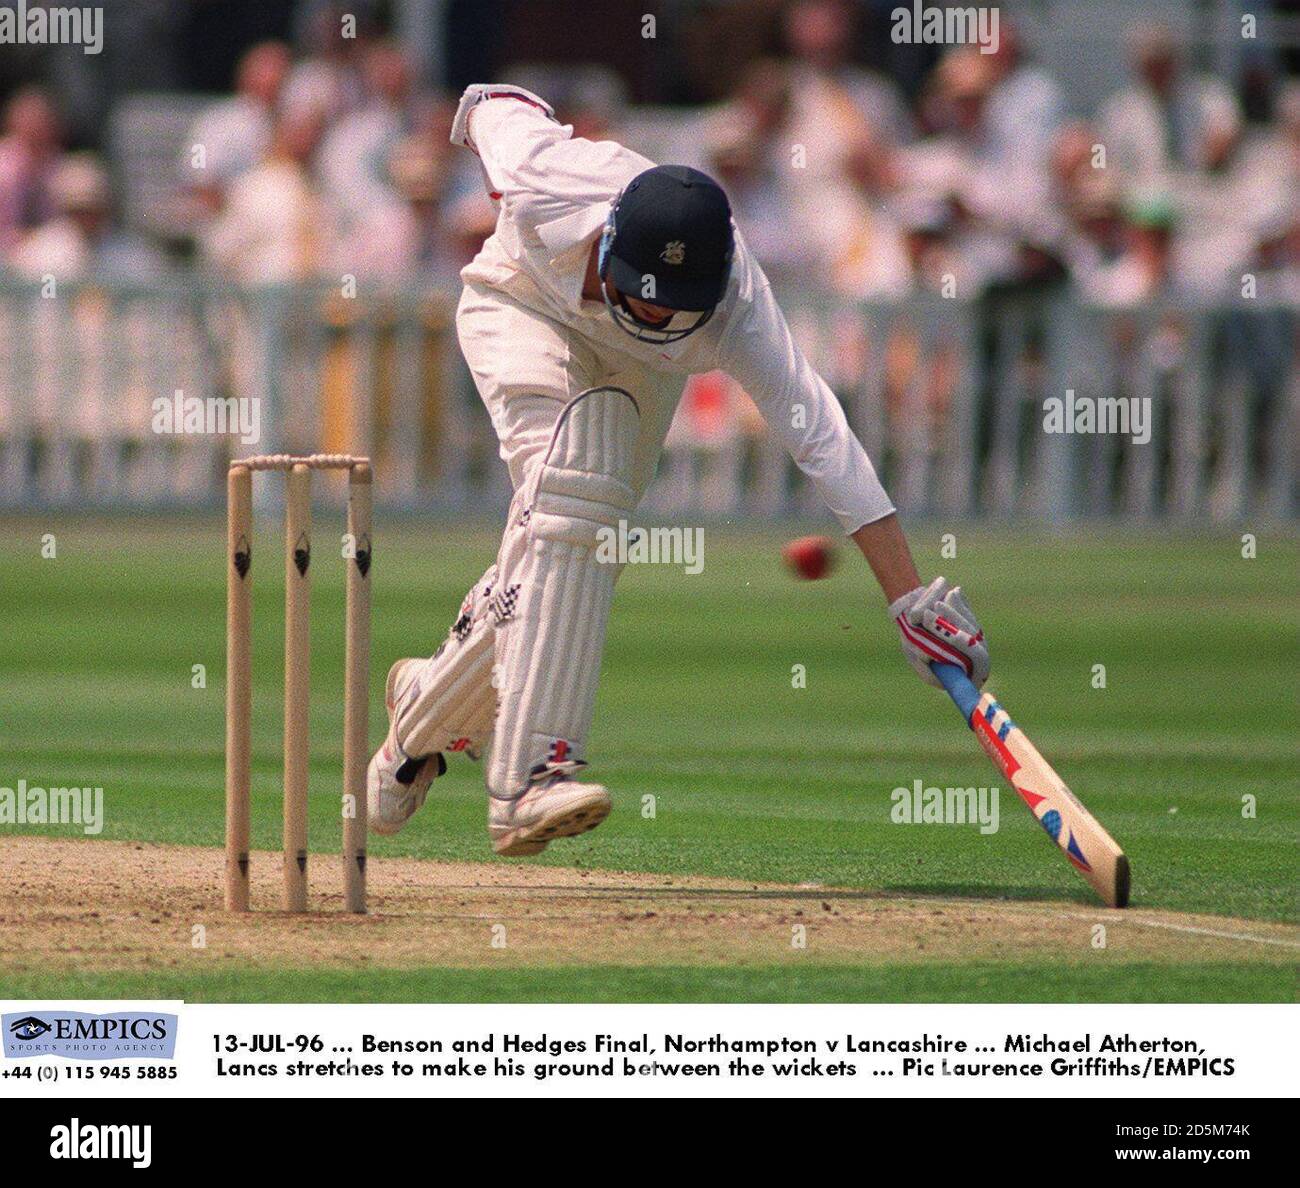 13-JUL-96 ... Benson and Hedges Final, Northampton v Lancashire ... Michael Atherton, Lancs stretches to make his ground between the wickets Stock Photo